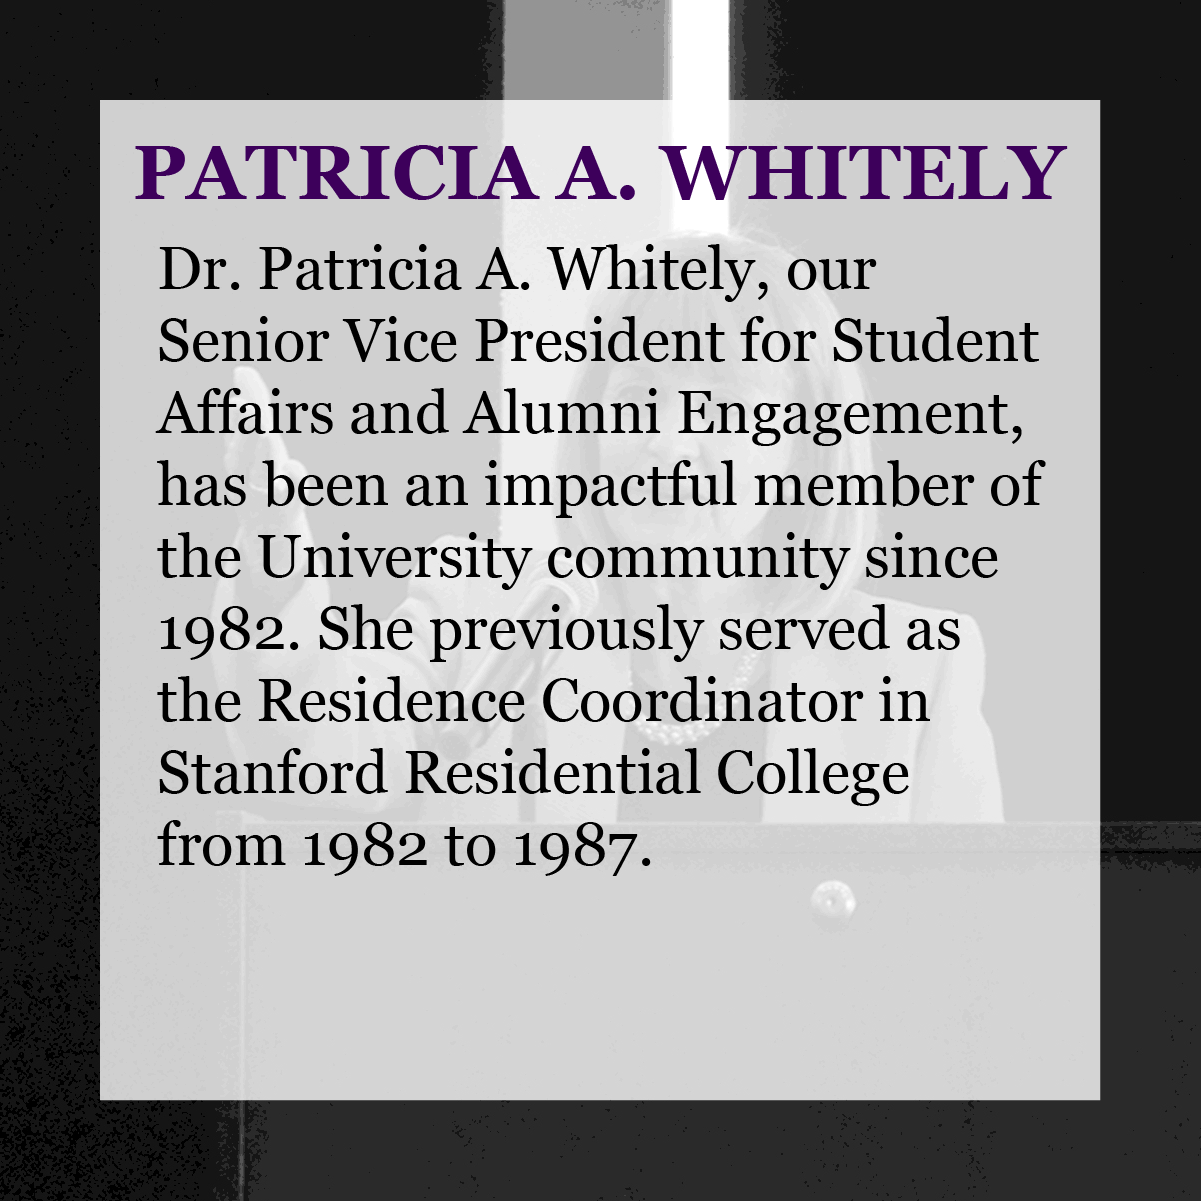 Text: Patricia A. Whitely - Dr. Patricia A. Whitely, our Senior Vice President for Student Affairs and Alumni Engagement, has been an Impactful member of the University community since 1982. She previously served as the Residence Coordinator in Stanford Residential College from 1982 to 1987.